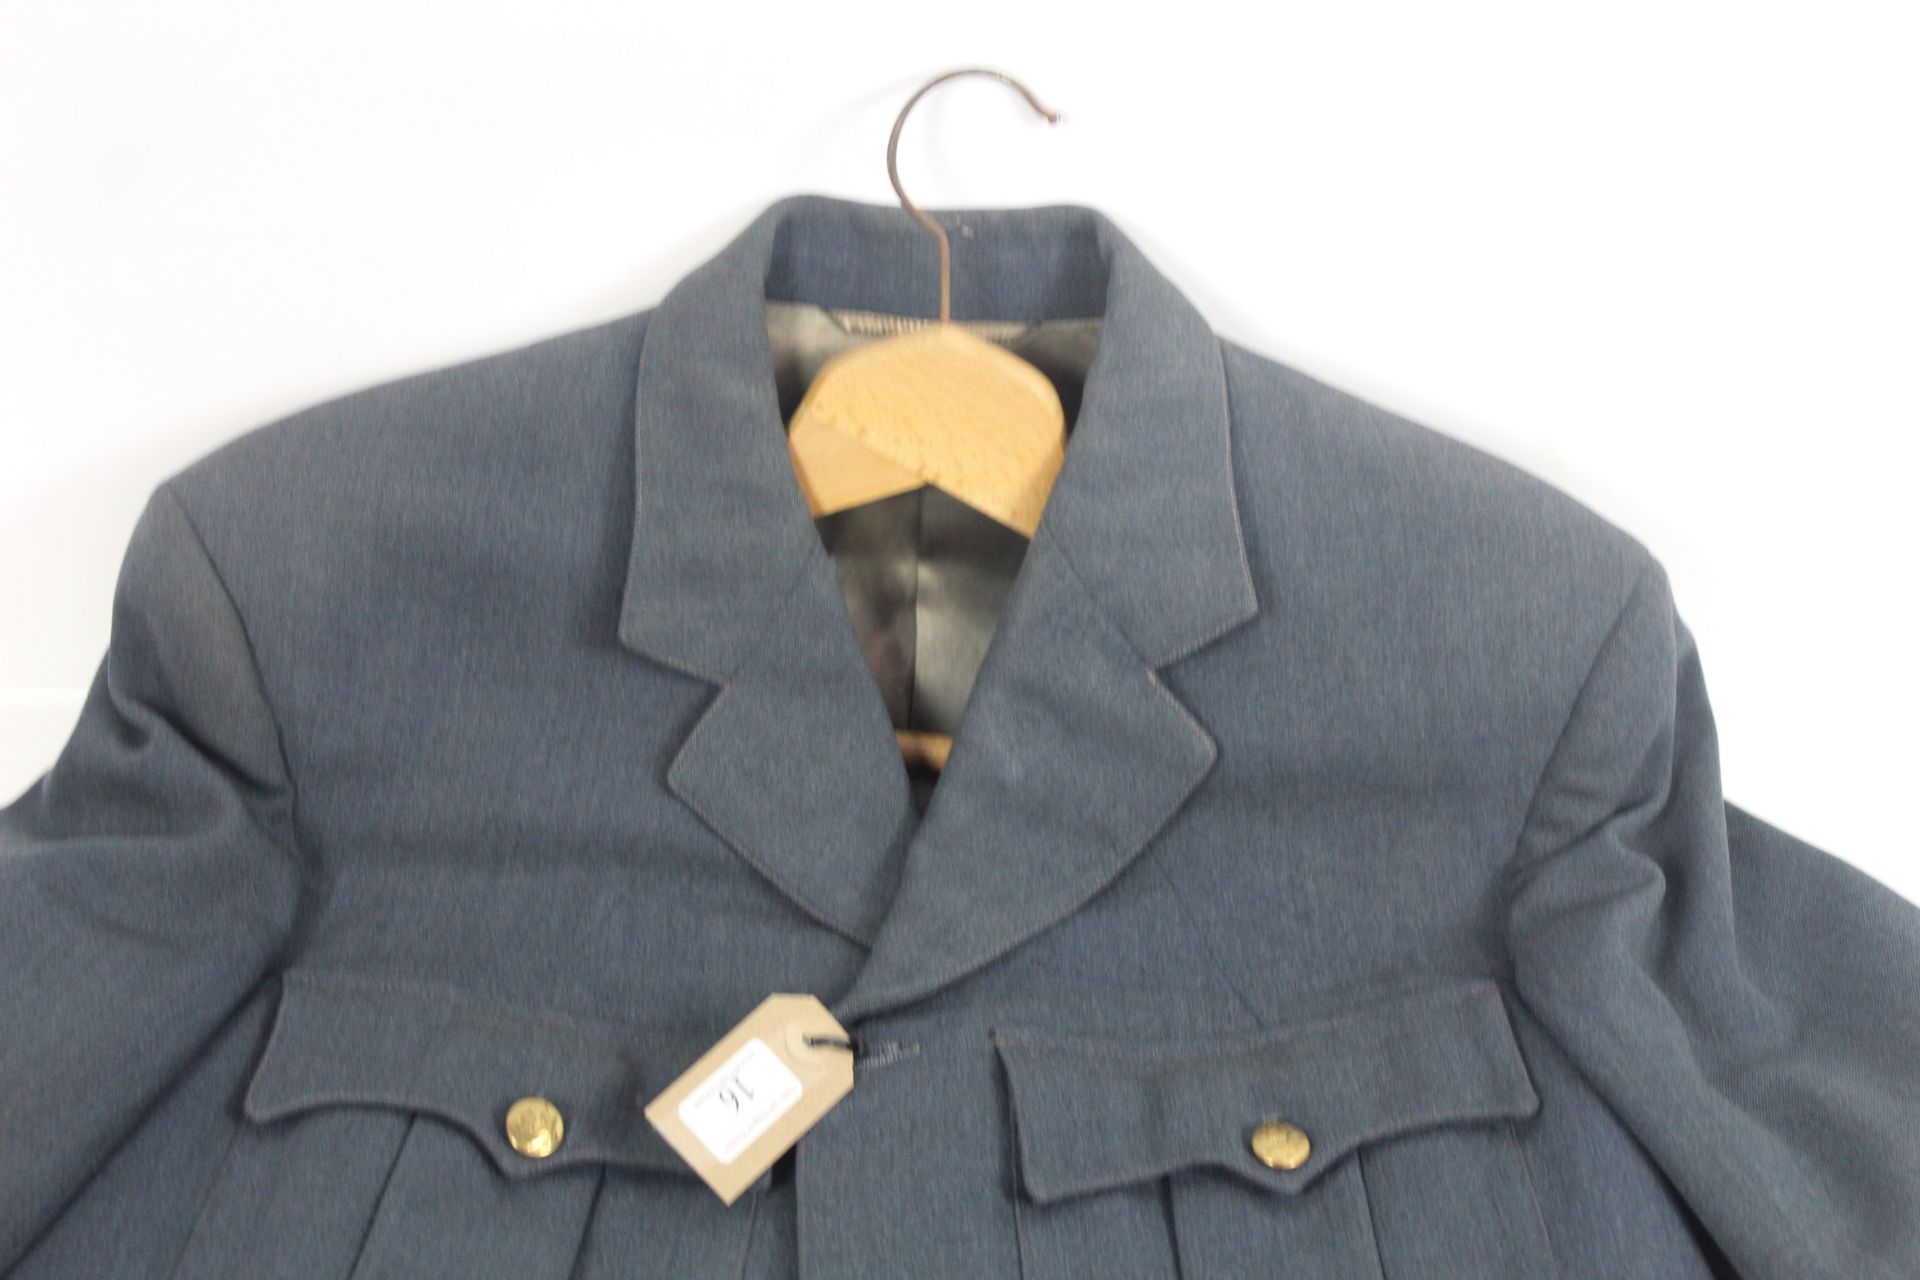 An R.A.F. Officers service jacket with Kings Crown - Image 2 of 14